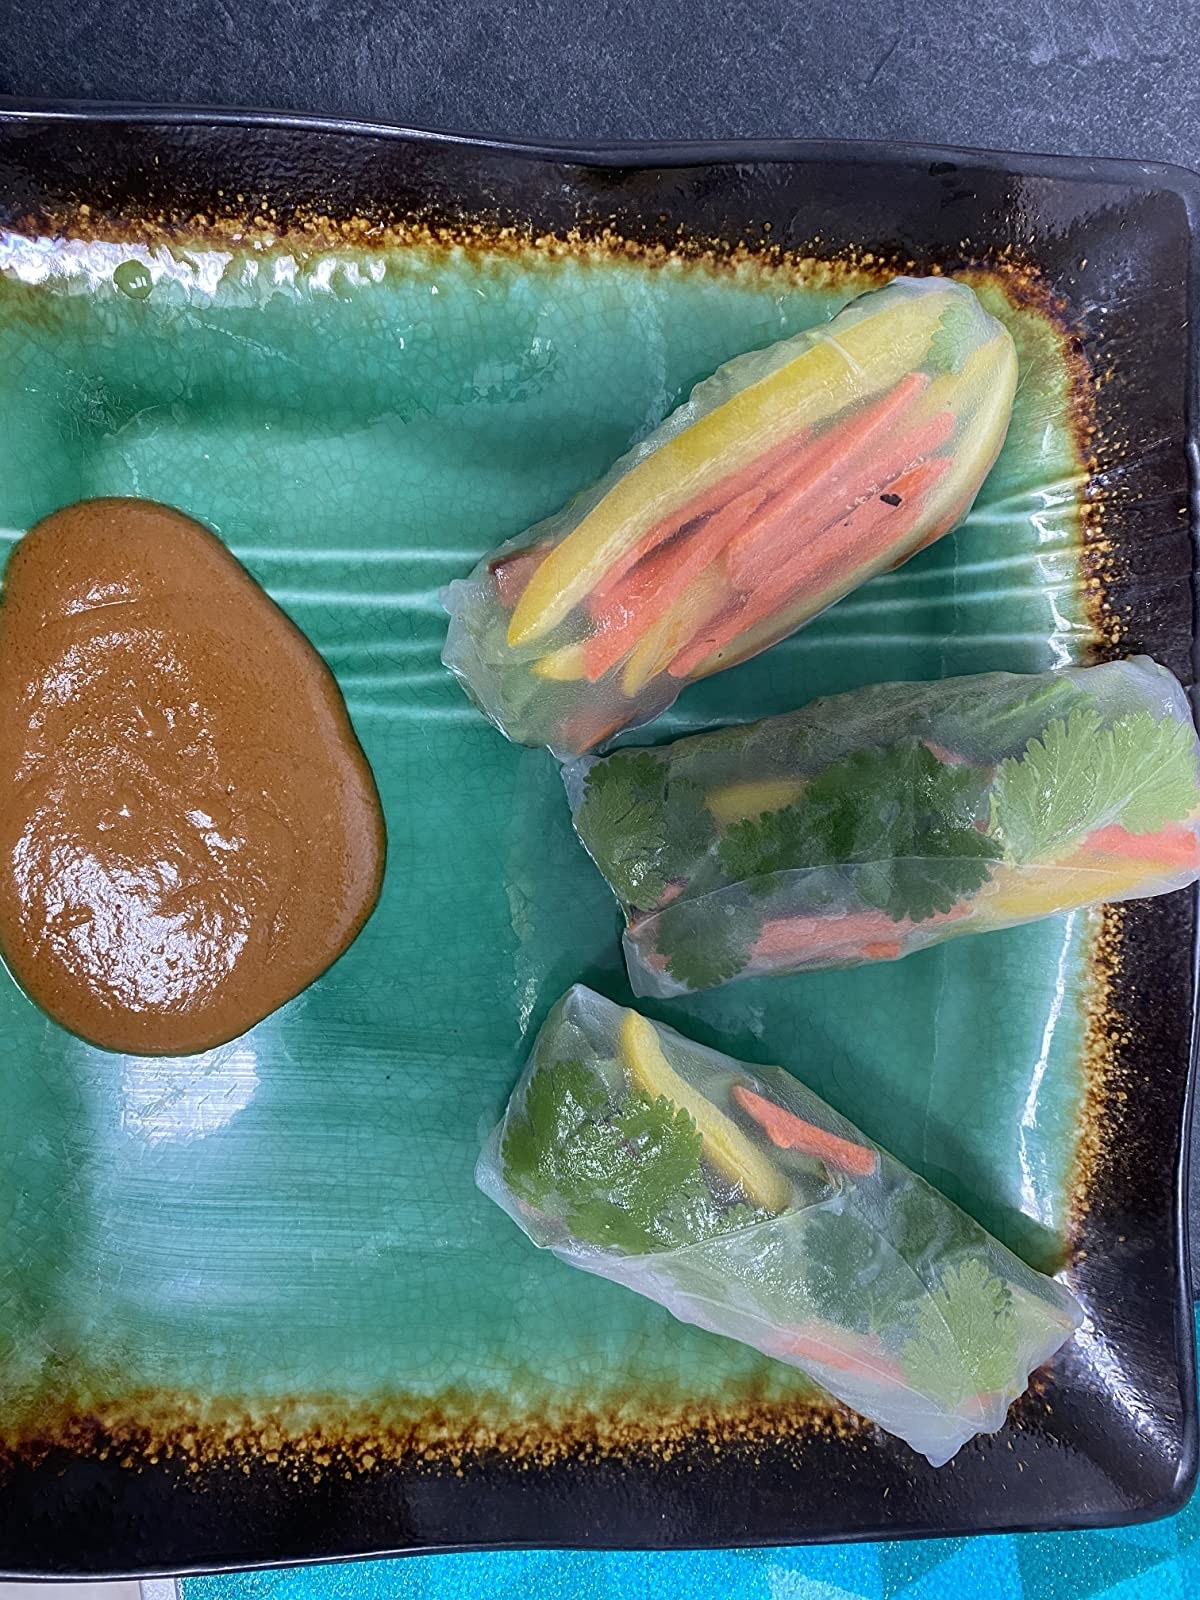 Reviewer image of spring rolls made using the rice paper, raw veggies, teriyaki baked tofu, and a peanut dipping sauce